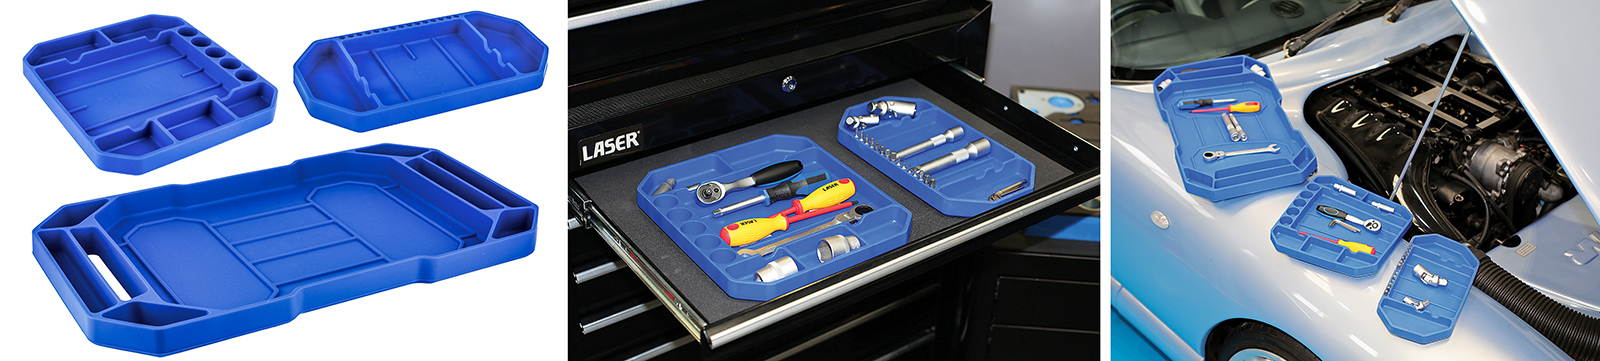 Soft-touch rubber tools trays keep tools handy, prevent marks on paintwork